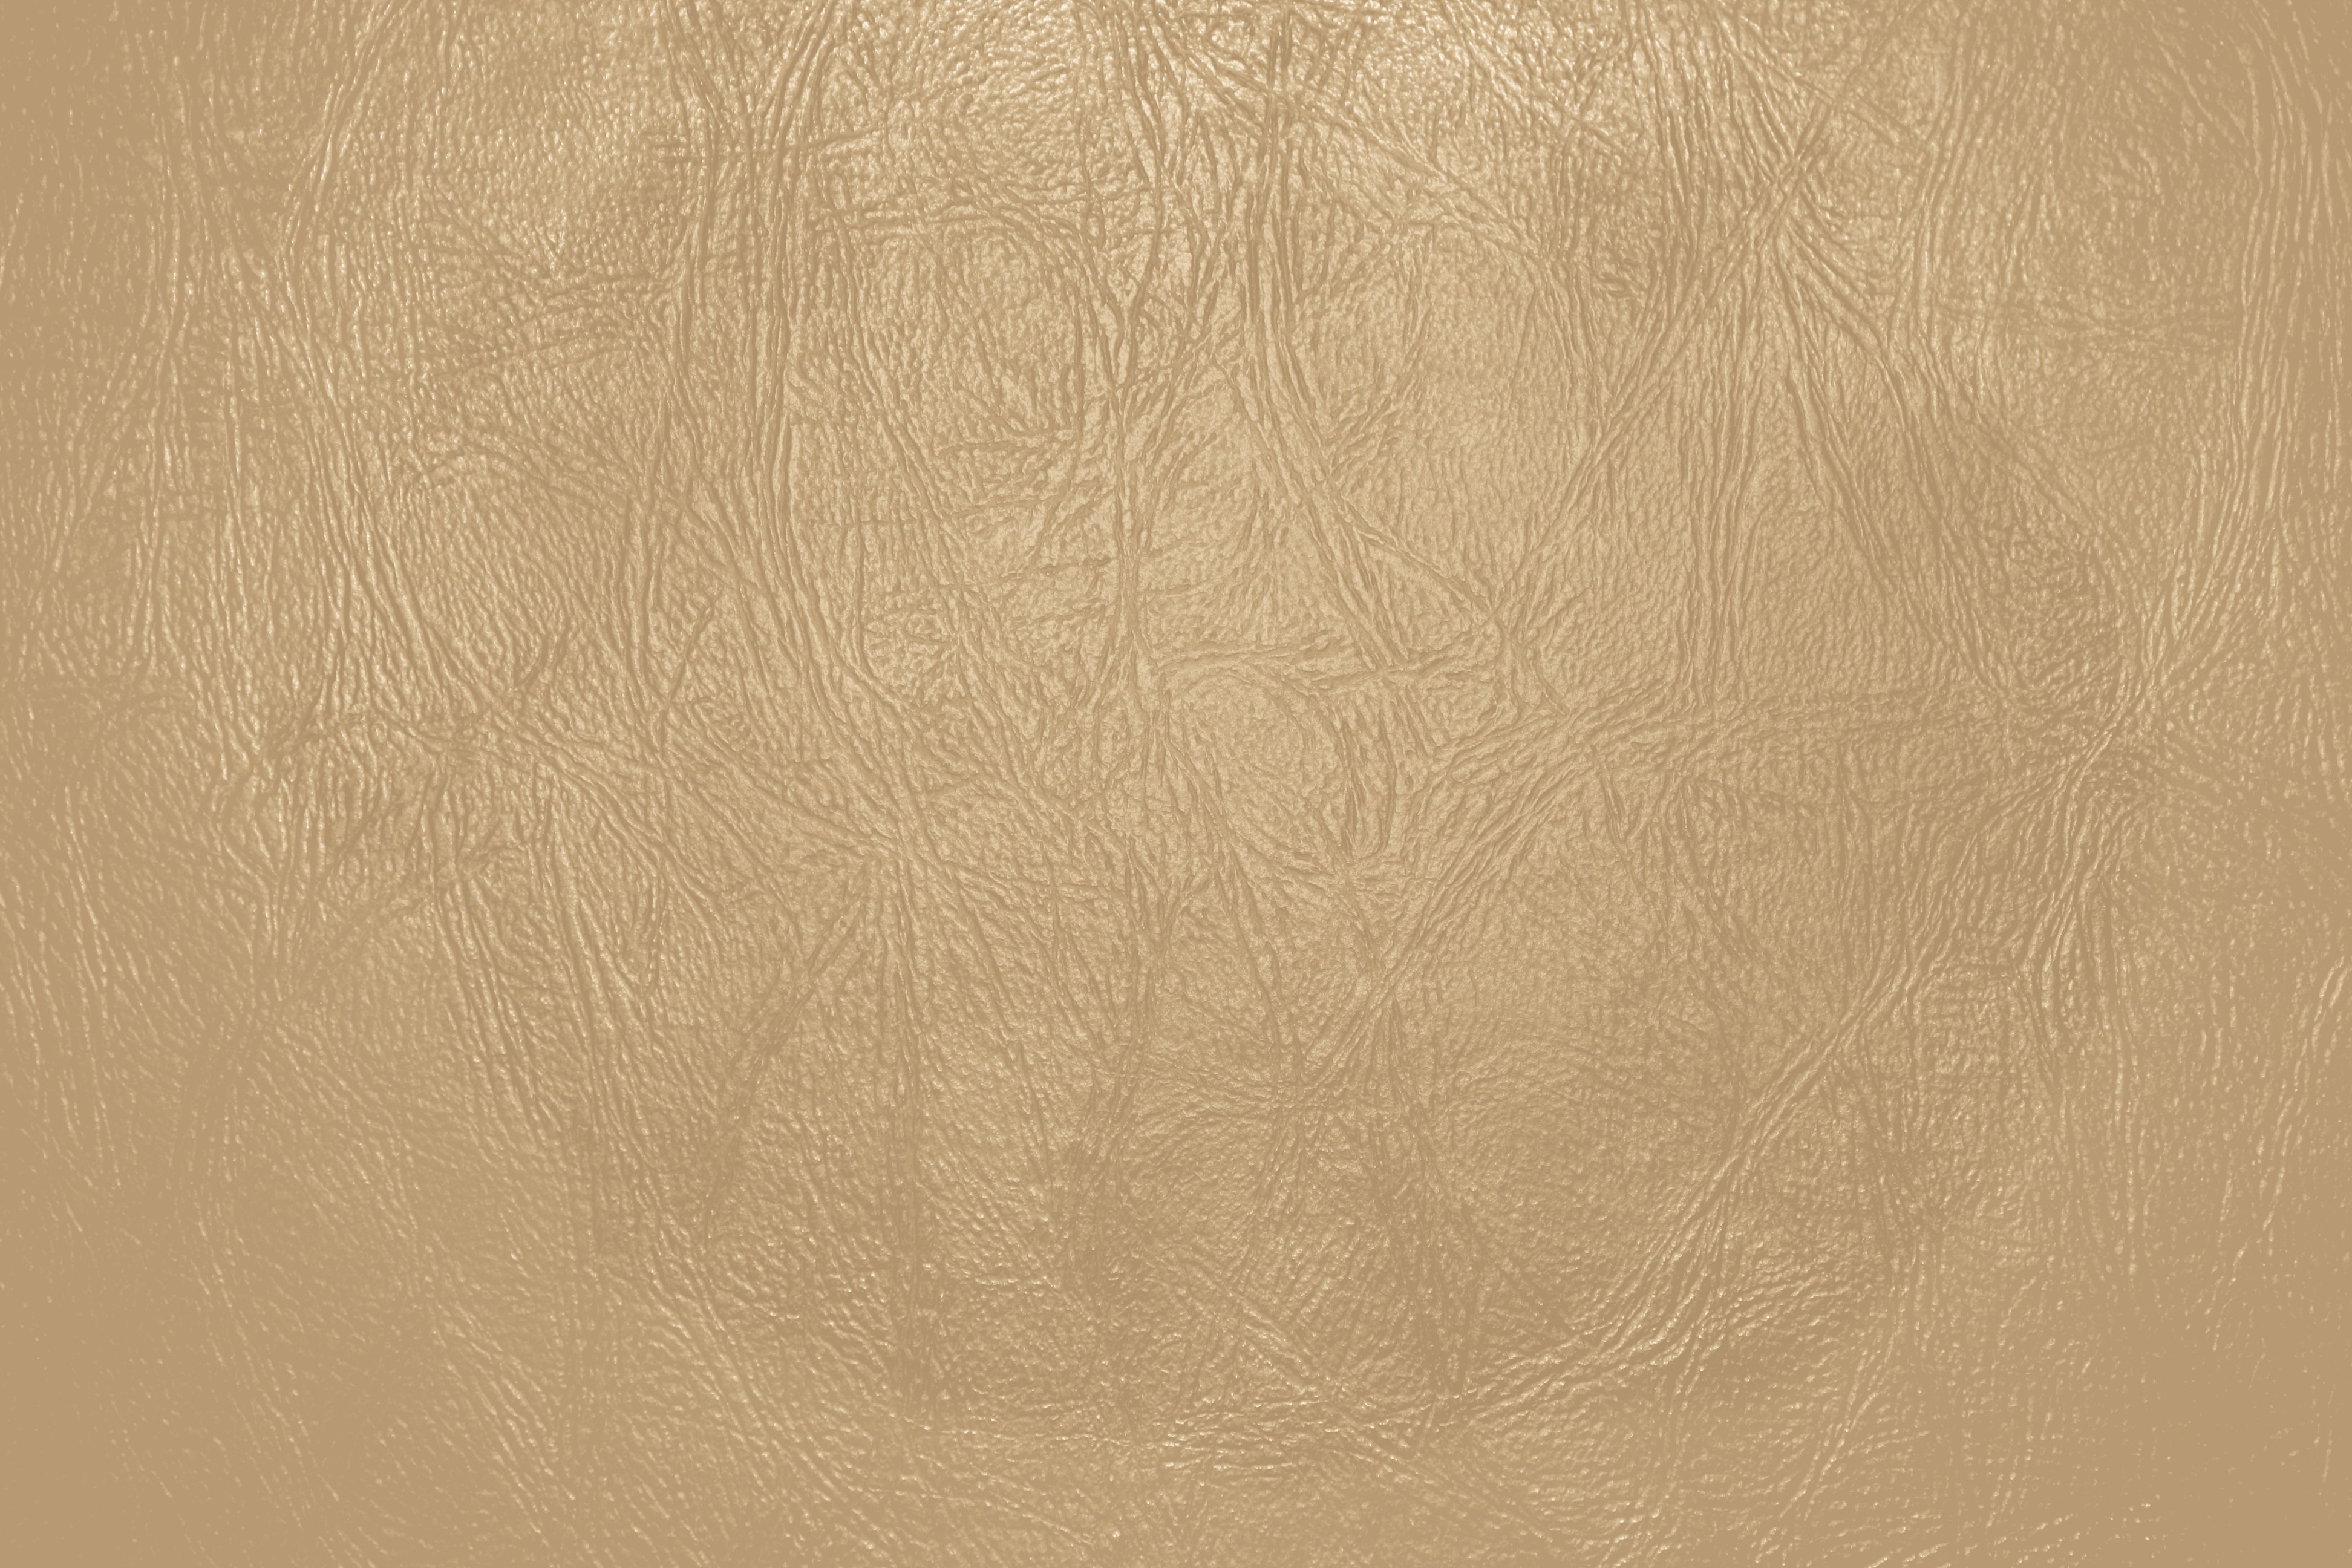 Tan Leather Close Up Texture Picture Free Photograph HD Wallpapers Download Free Images Wallpaper [wallpaper981.blogspot.com]